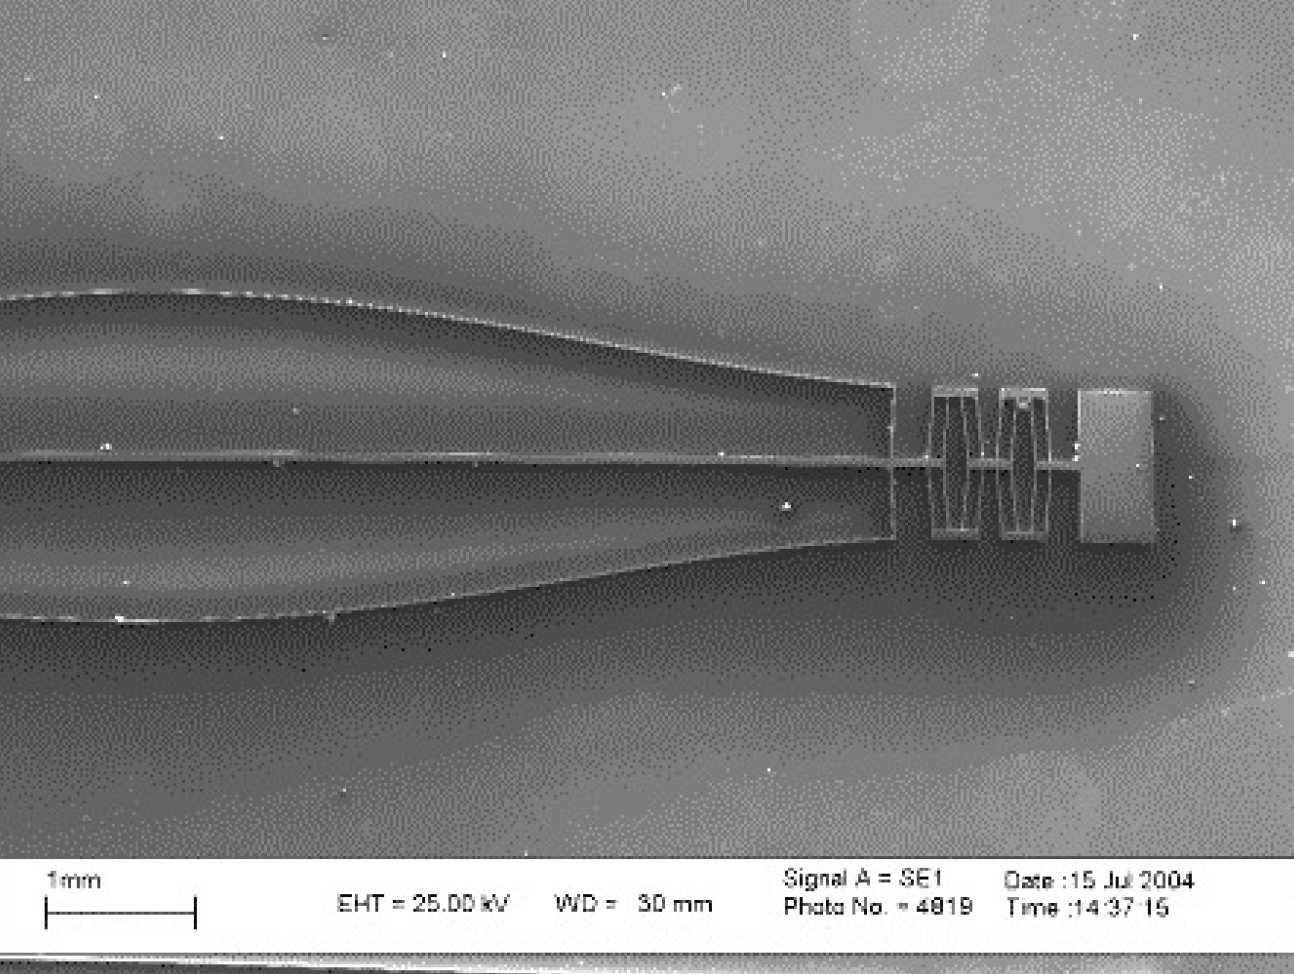 Prototype of coil support, fabricated by deep reactive ion etching of Si.